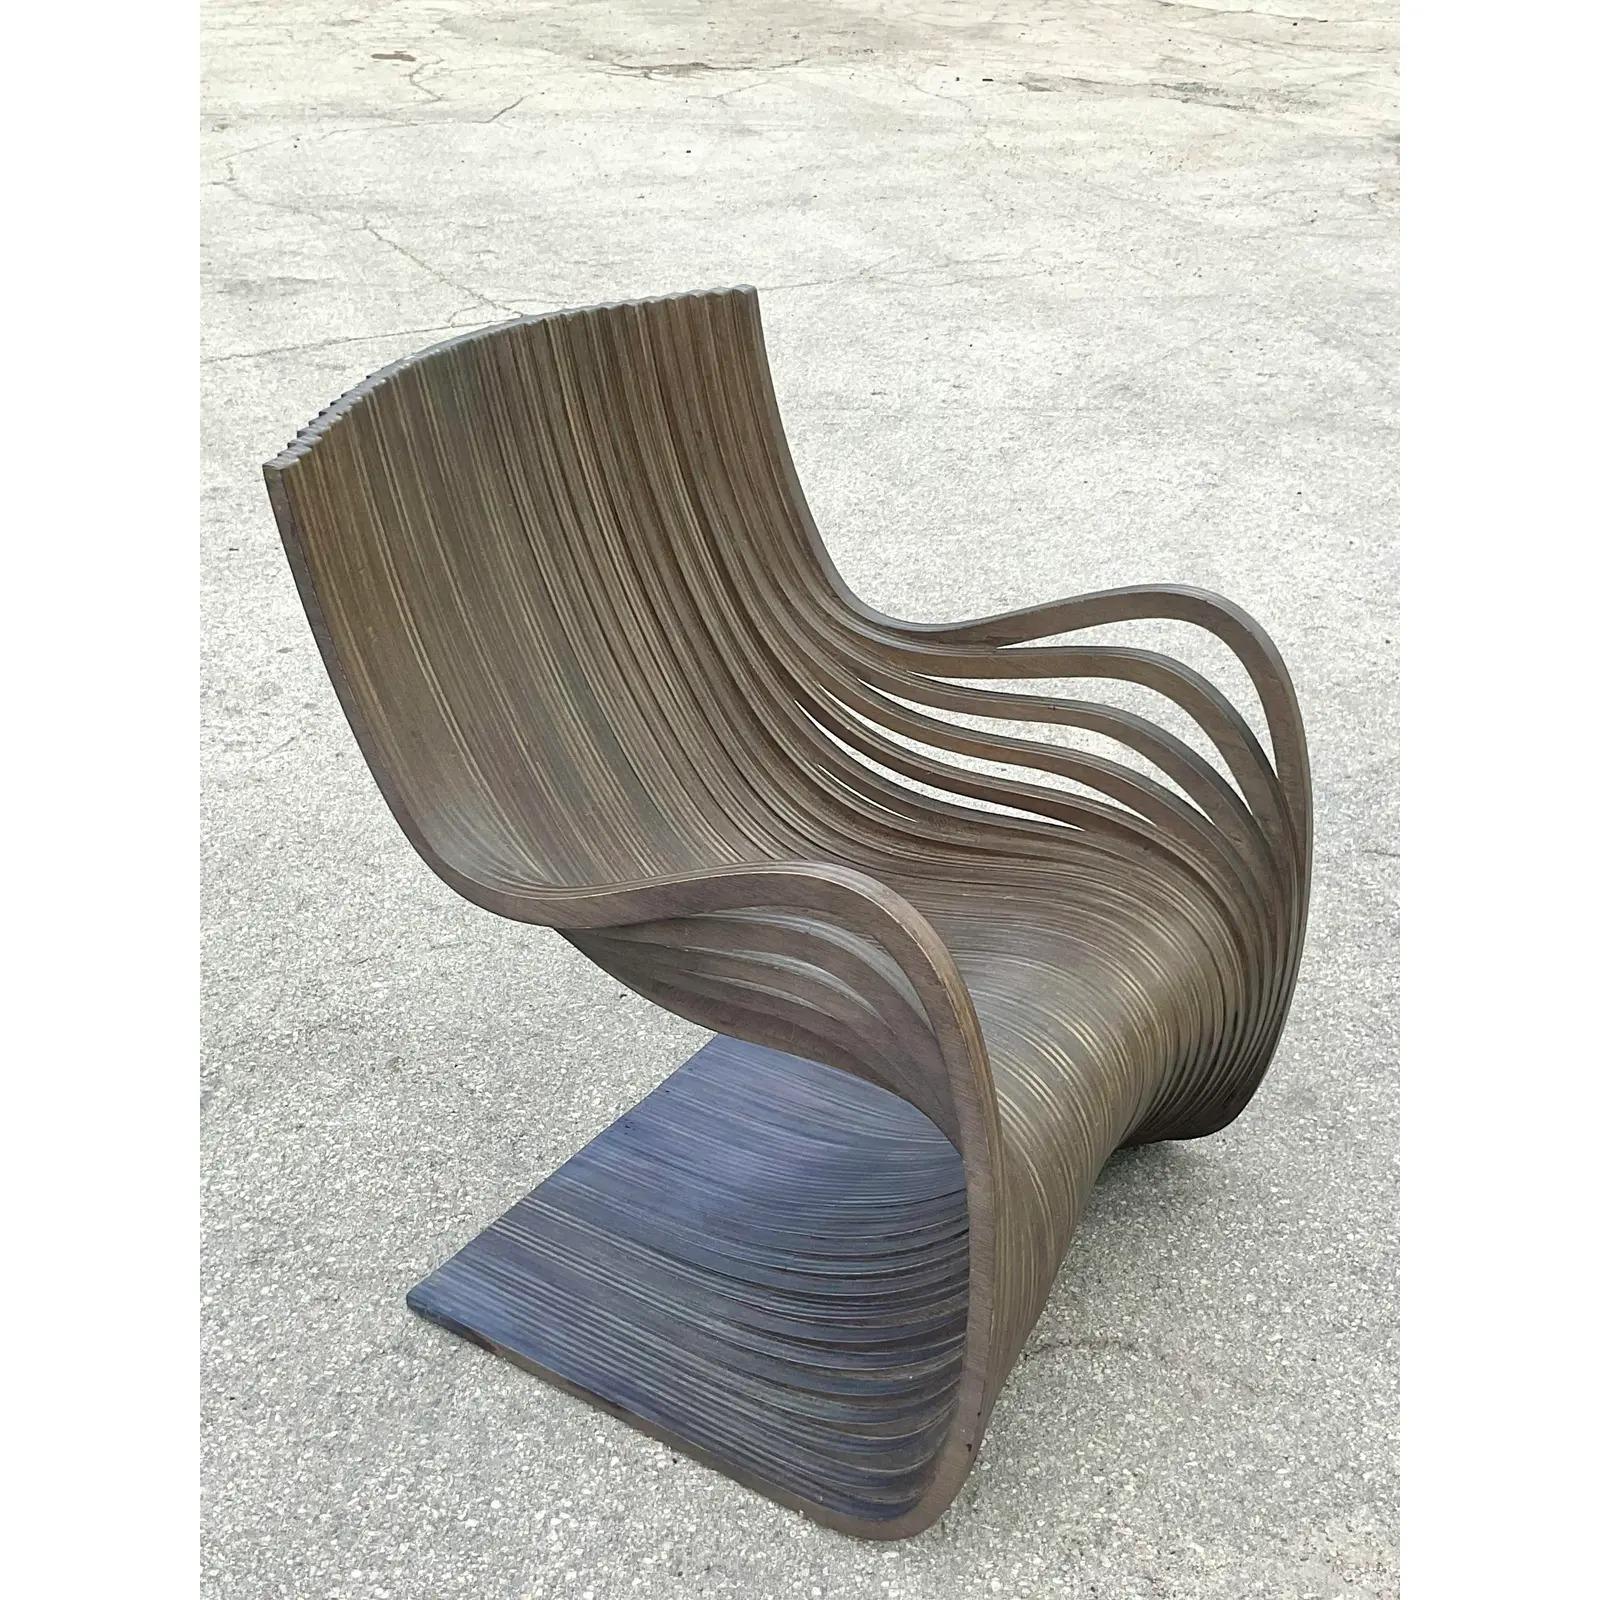 Italian Vintage Contemporary Piegatto Pipo Wenge Wood Lounge Chair